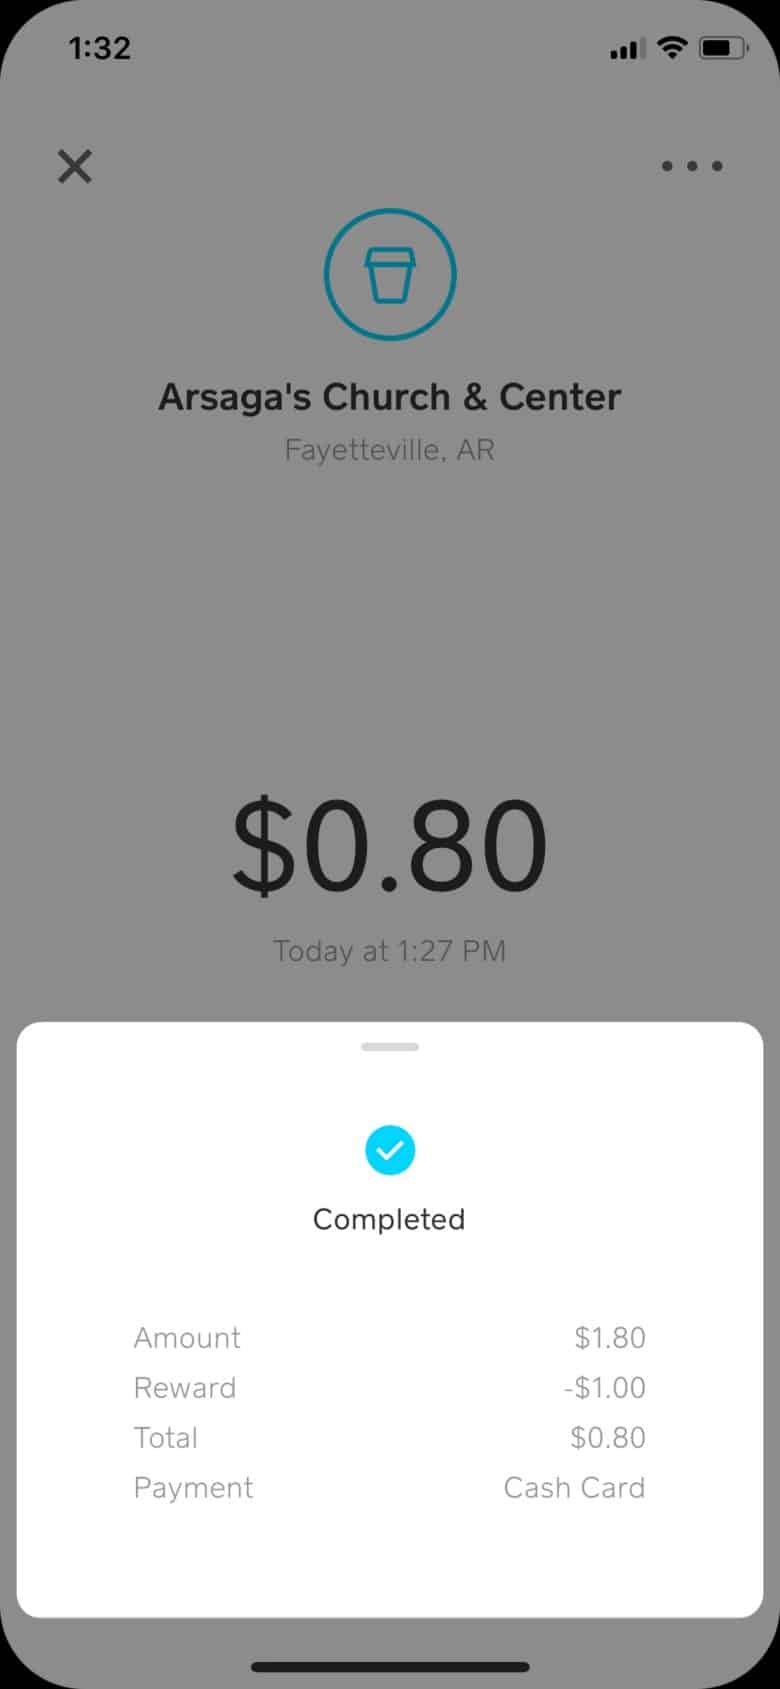 Just another $1 savings on a coffee with the Square Cash App.